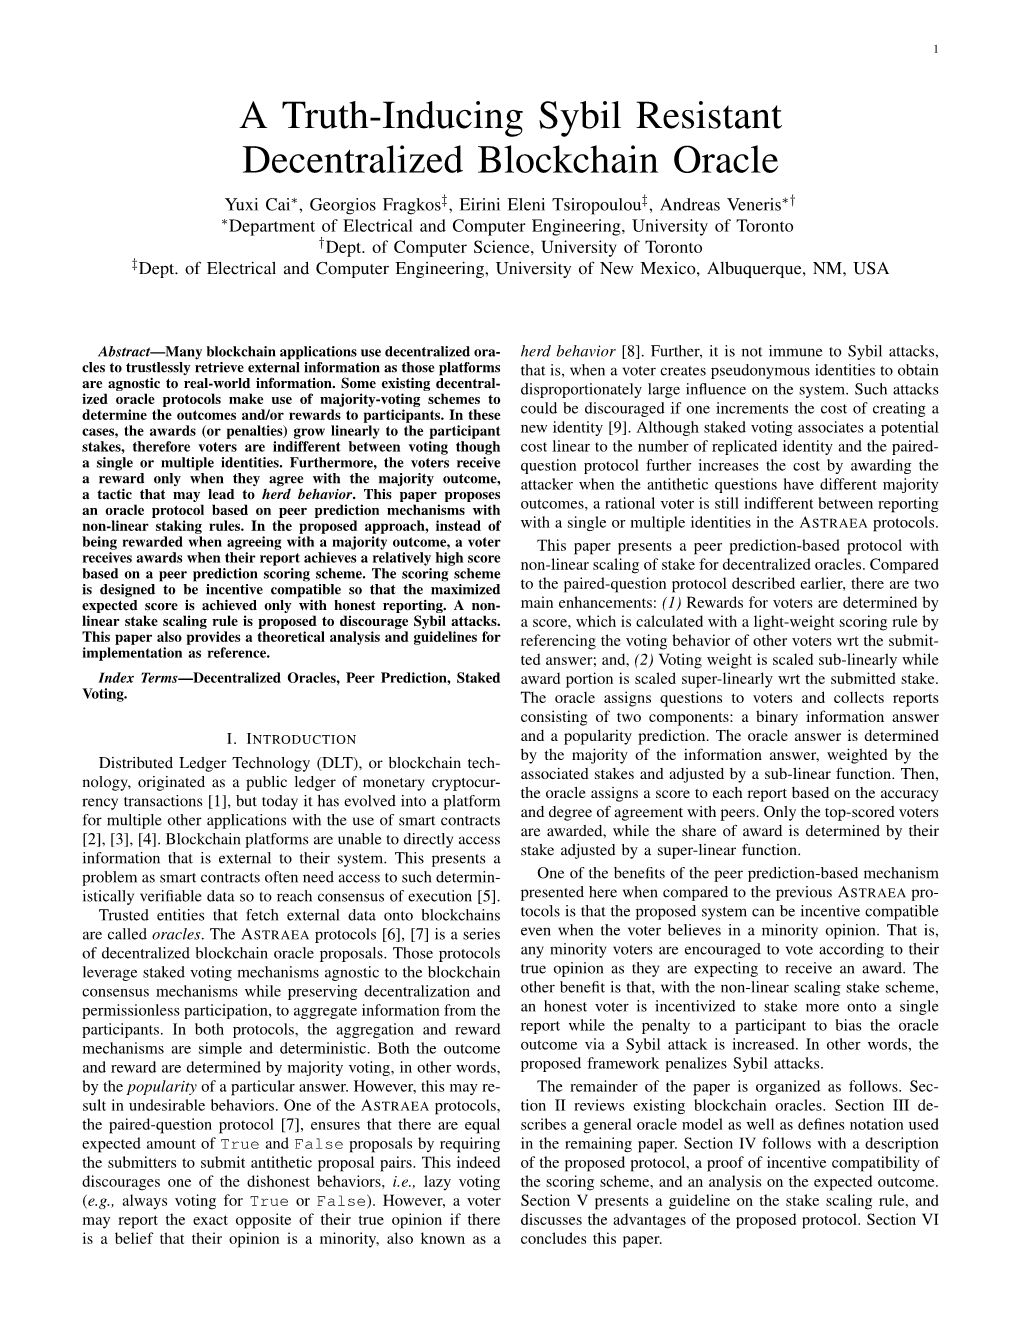 A Truth-Inducing Sybil Resistant Decentralized Blockchain Oracle